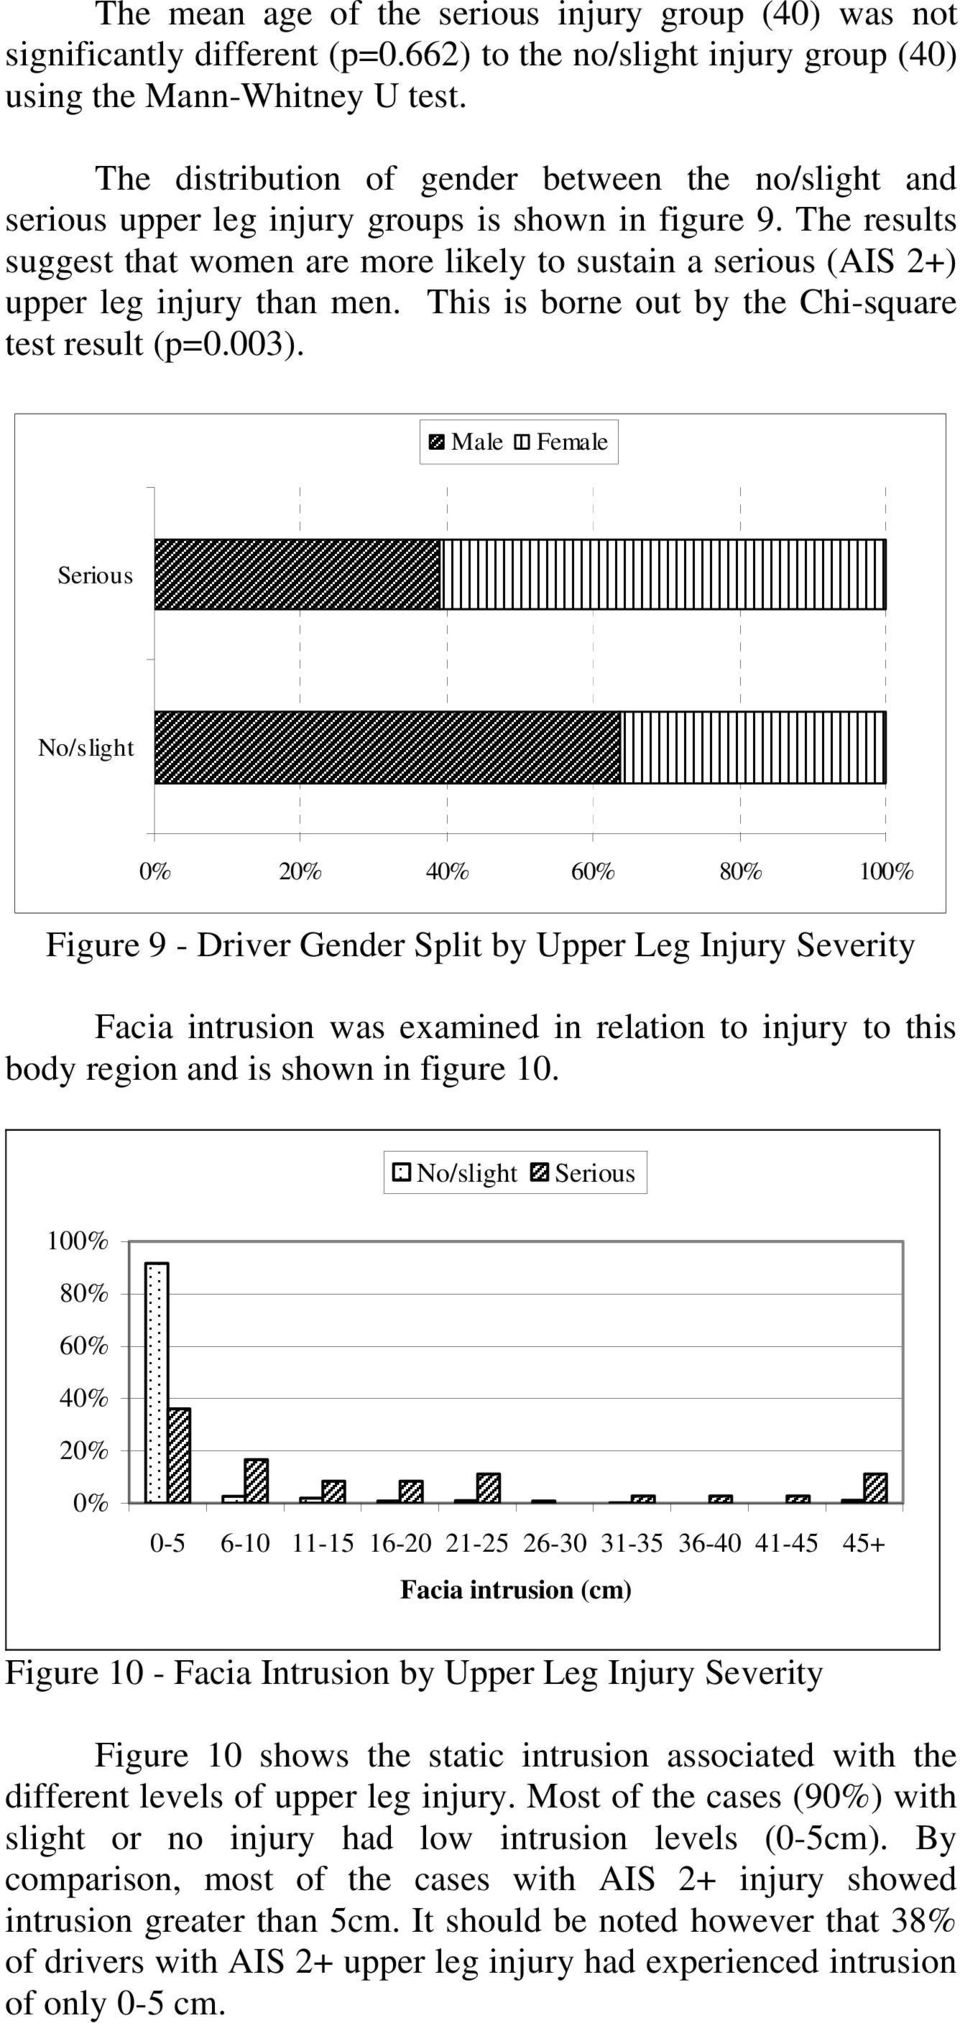 The results suggest that women are more likely to sustain a serious (AIS 2+) upper leg injury than men. This is borne out by the Chi-square test result (p=0.003).